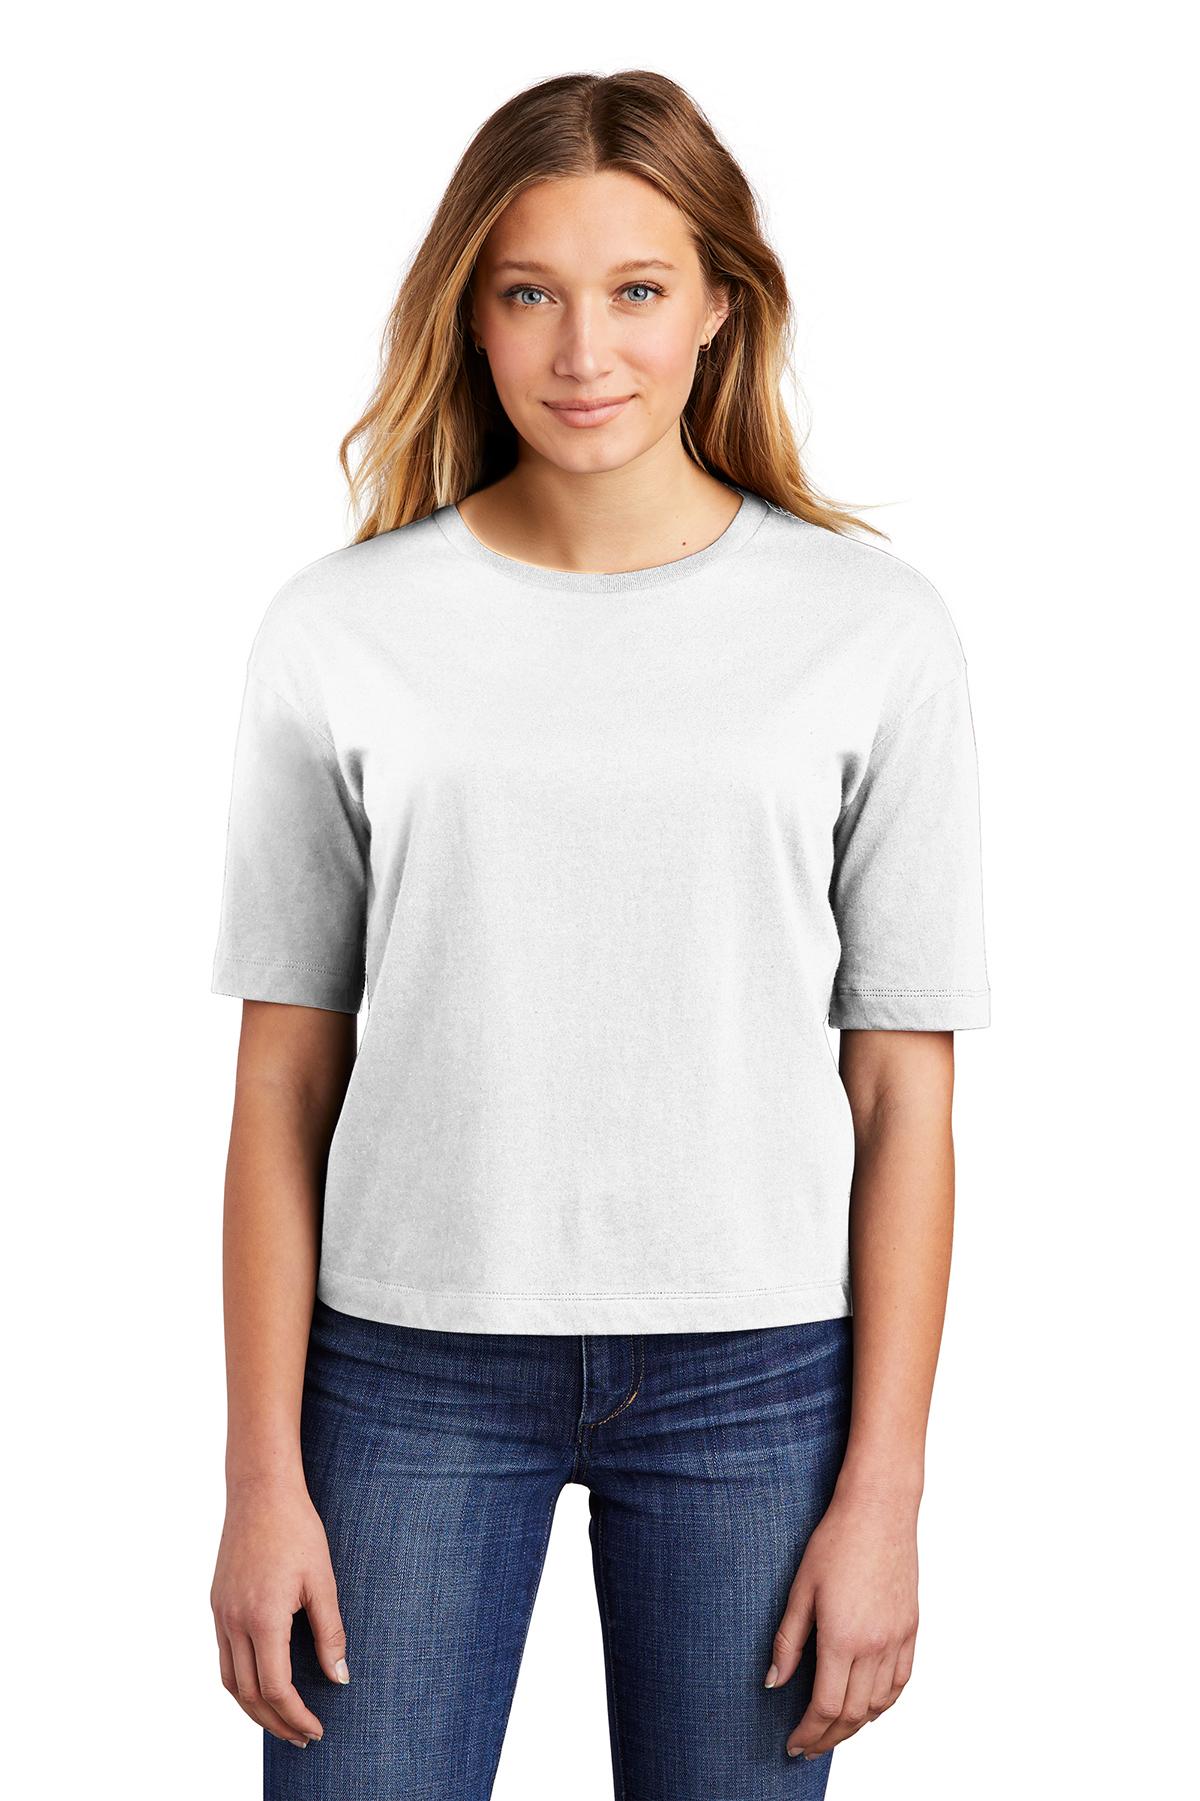 District DT6402 - Women's V.I.T. Boxy Tee